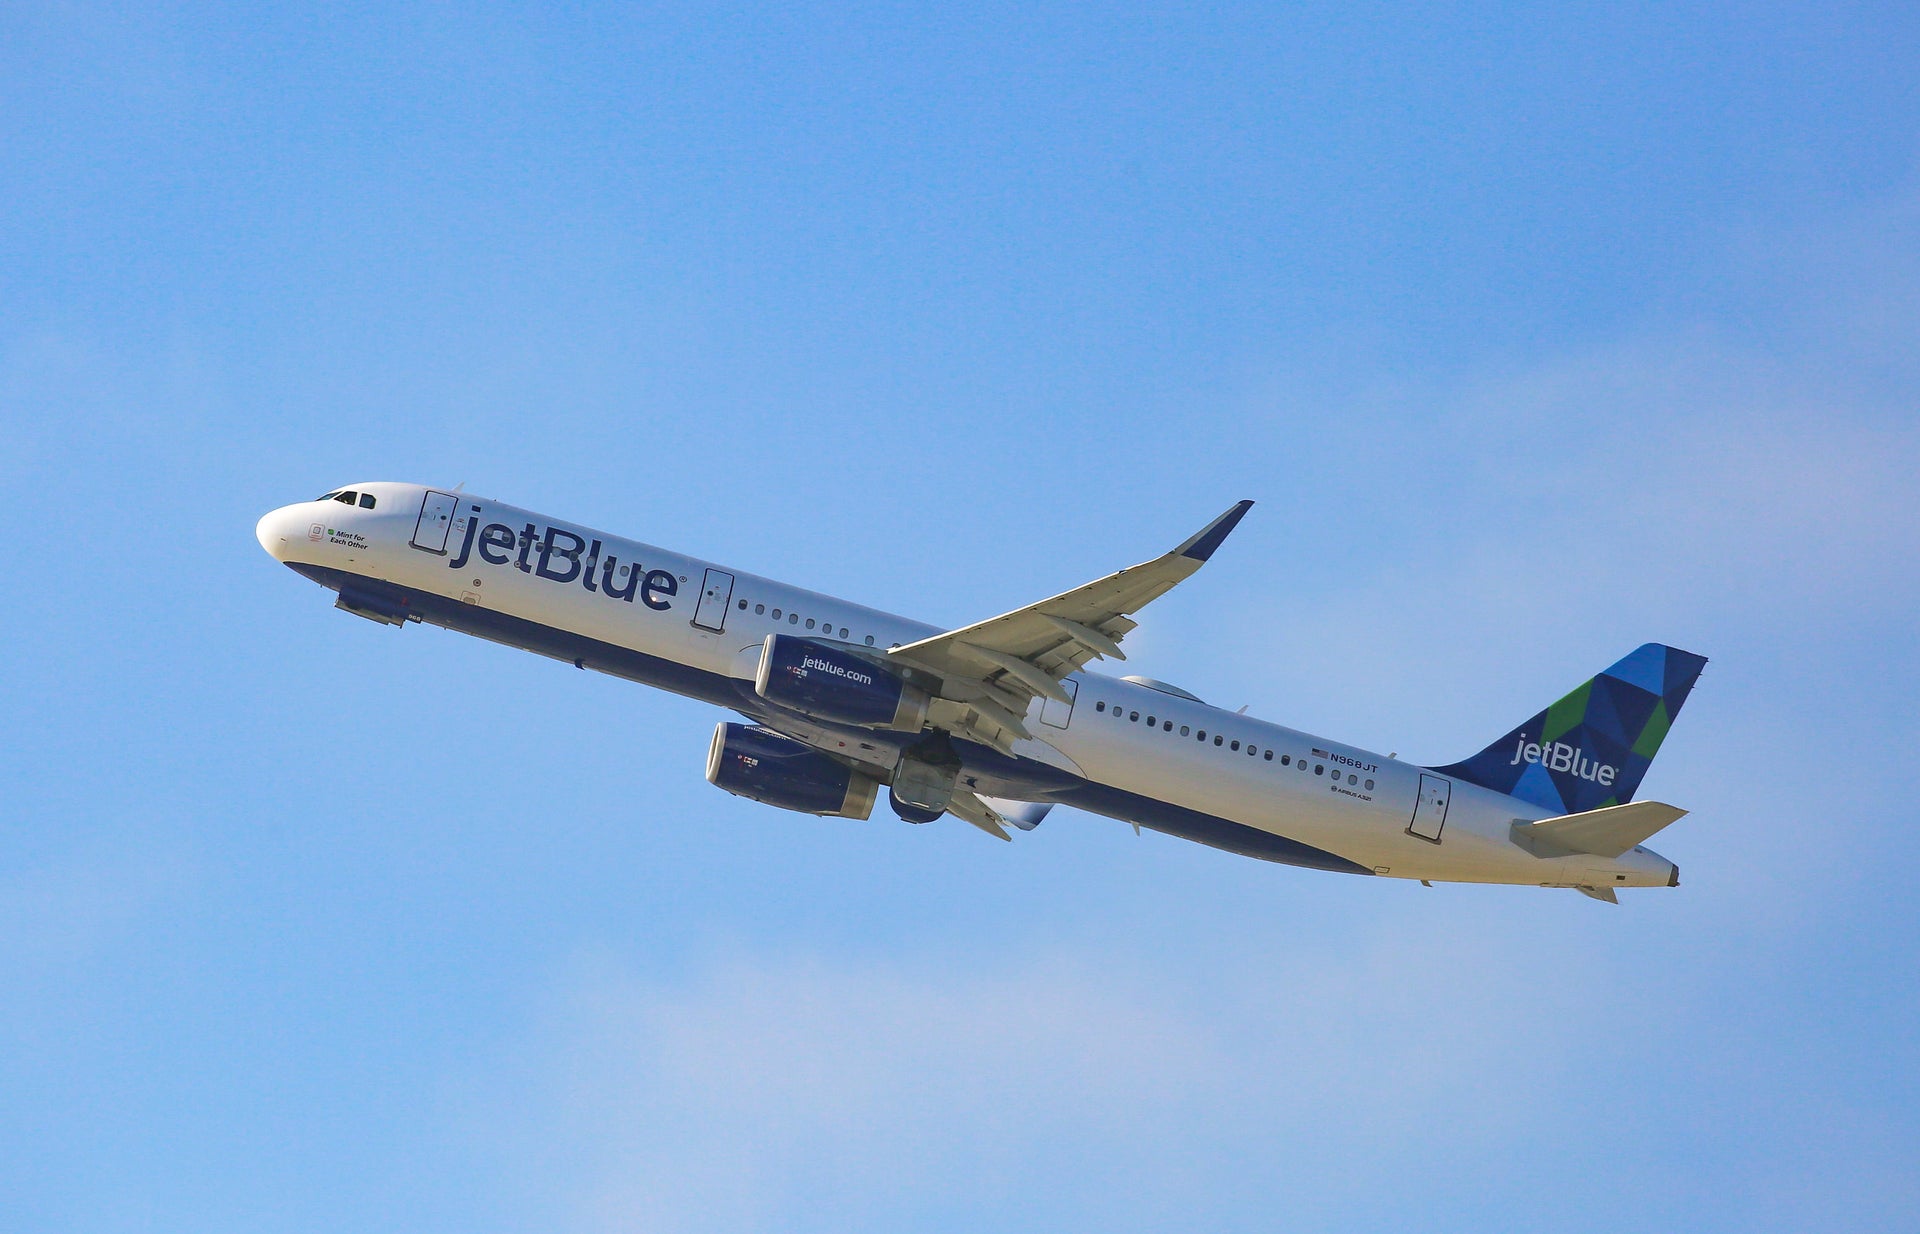 JetBlue Schedule Extended Through April 28, 2020 for All Your Spring